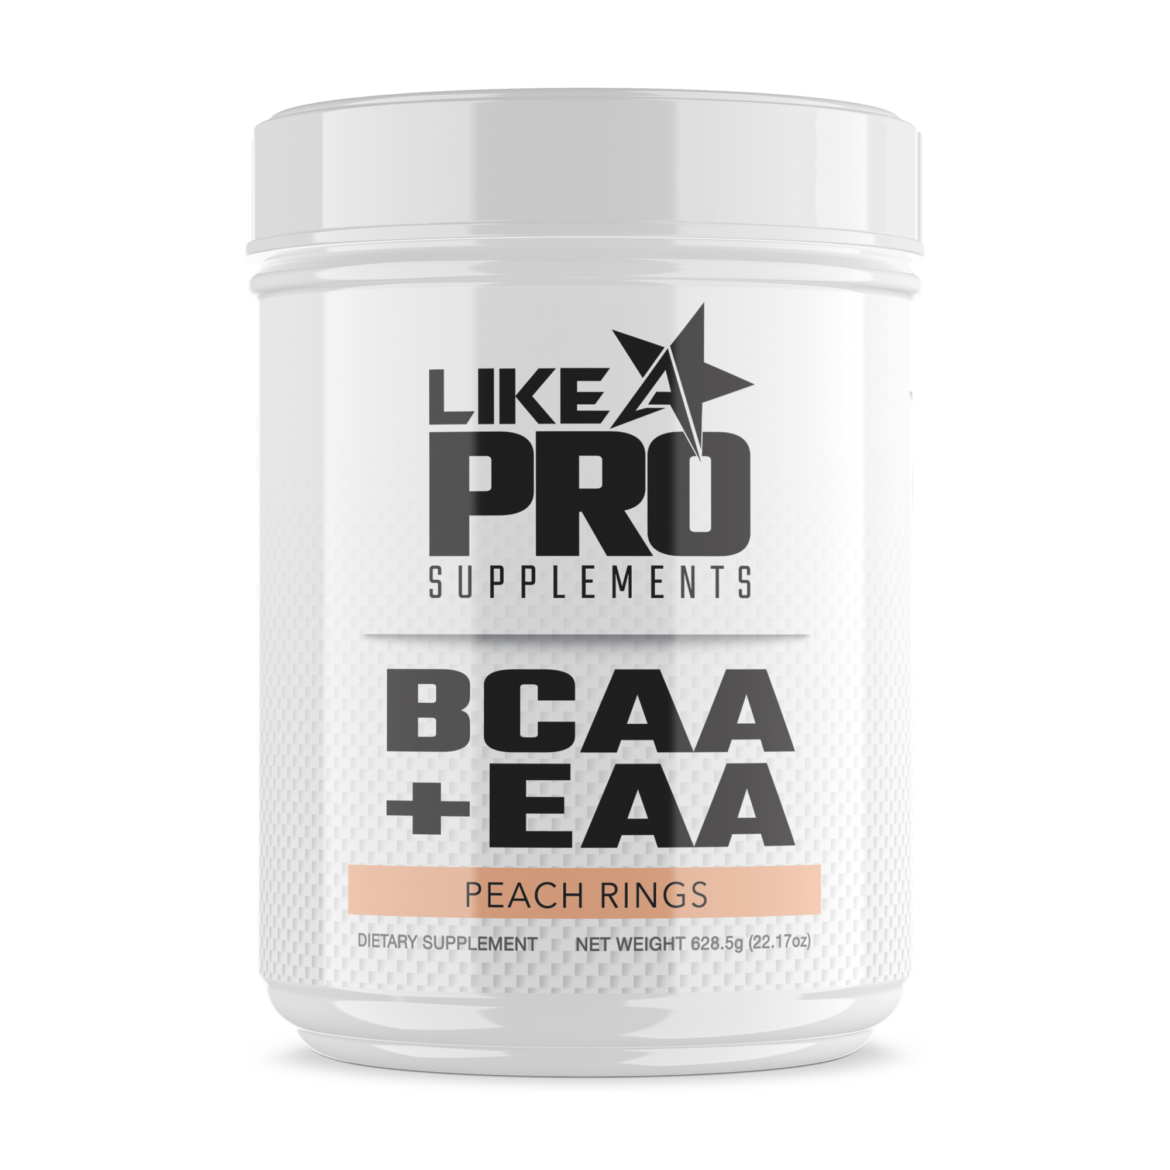 LAP_BCAA_peachrings_front_2000x2000.png